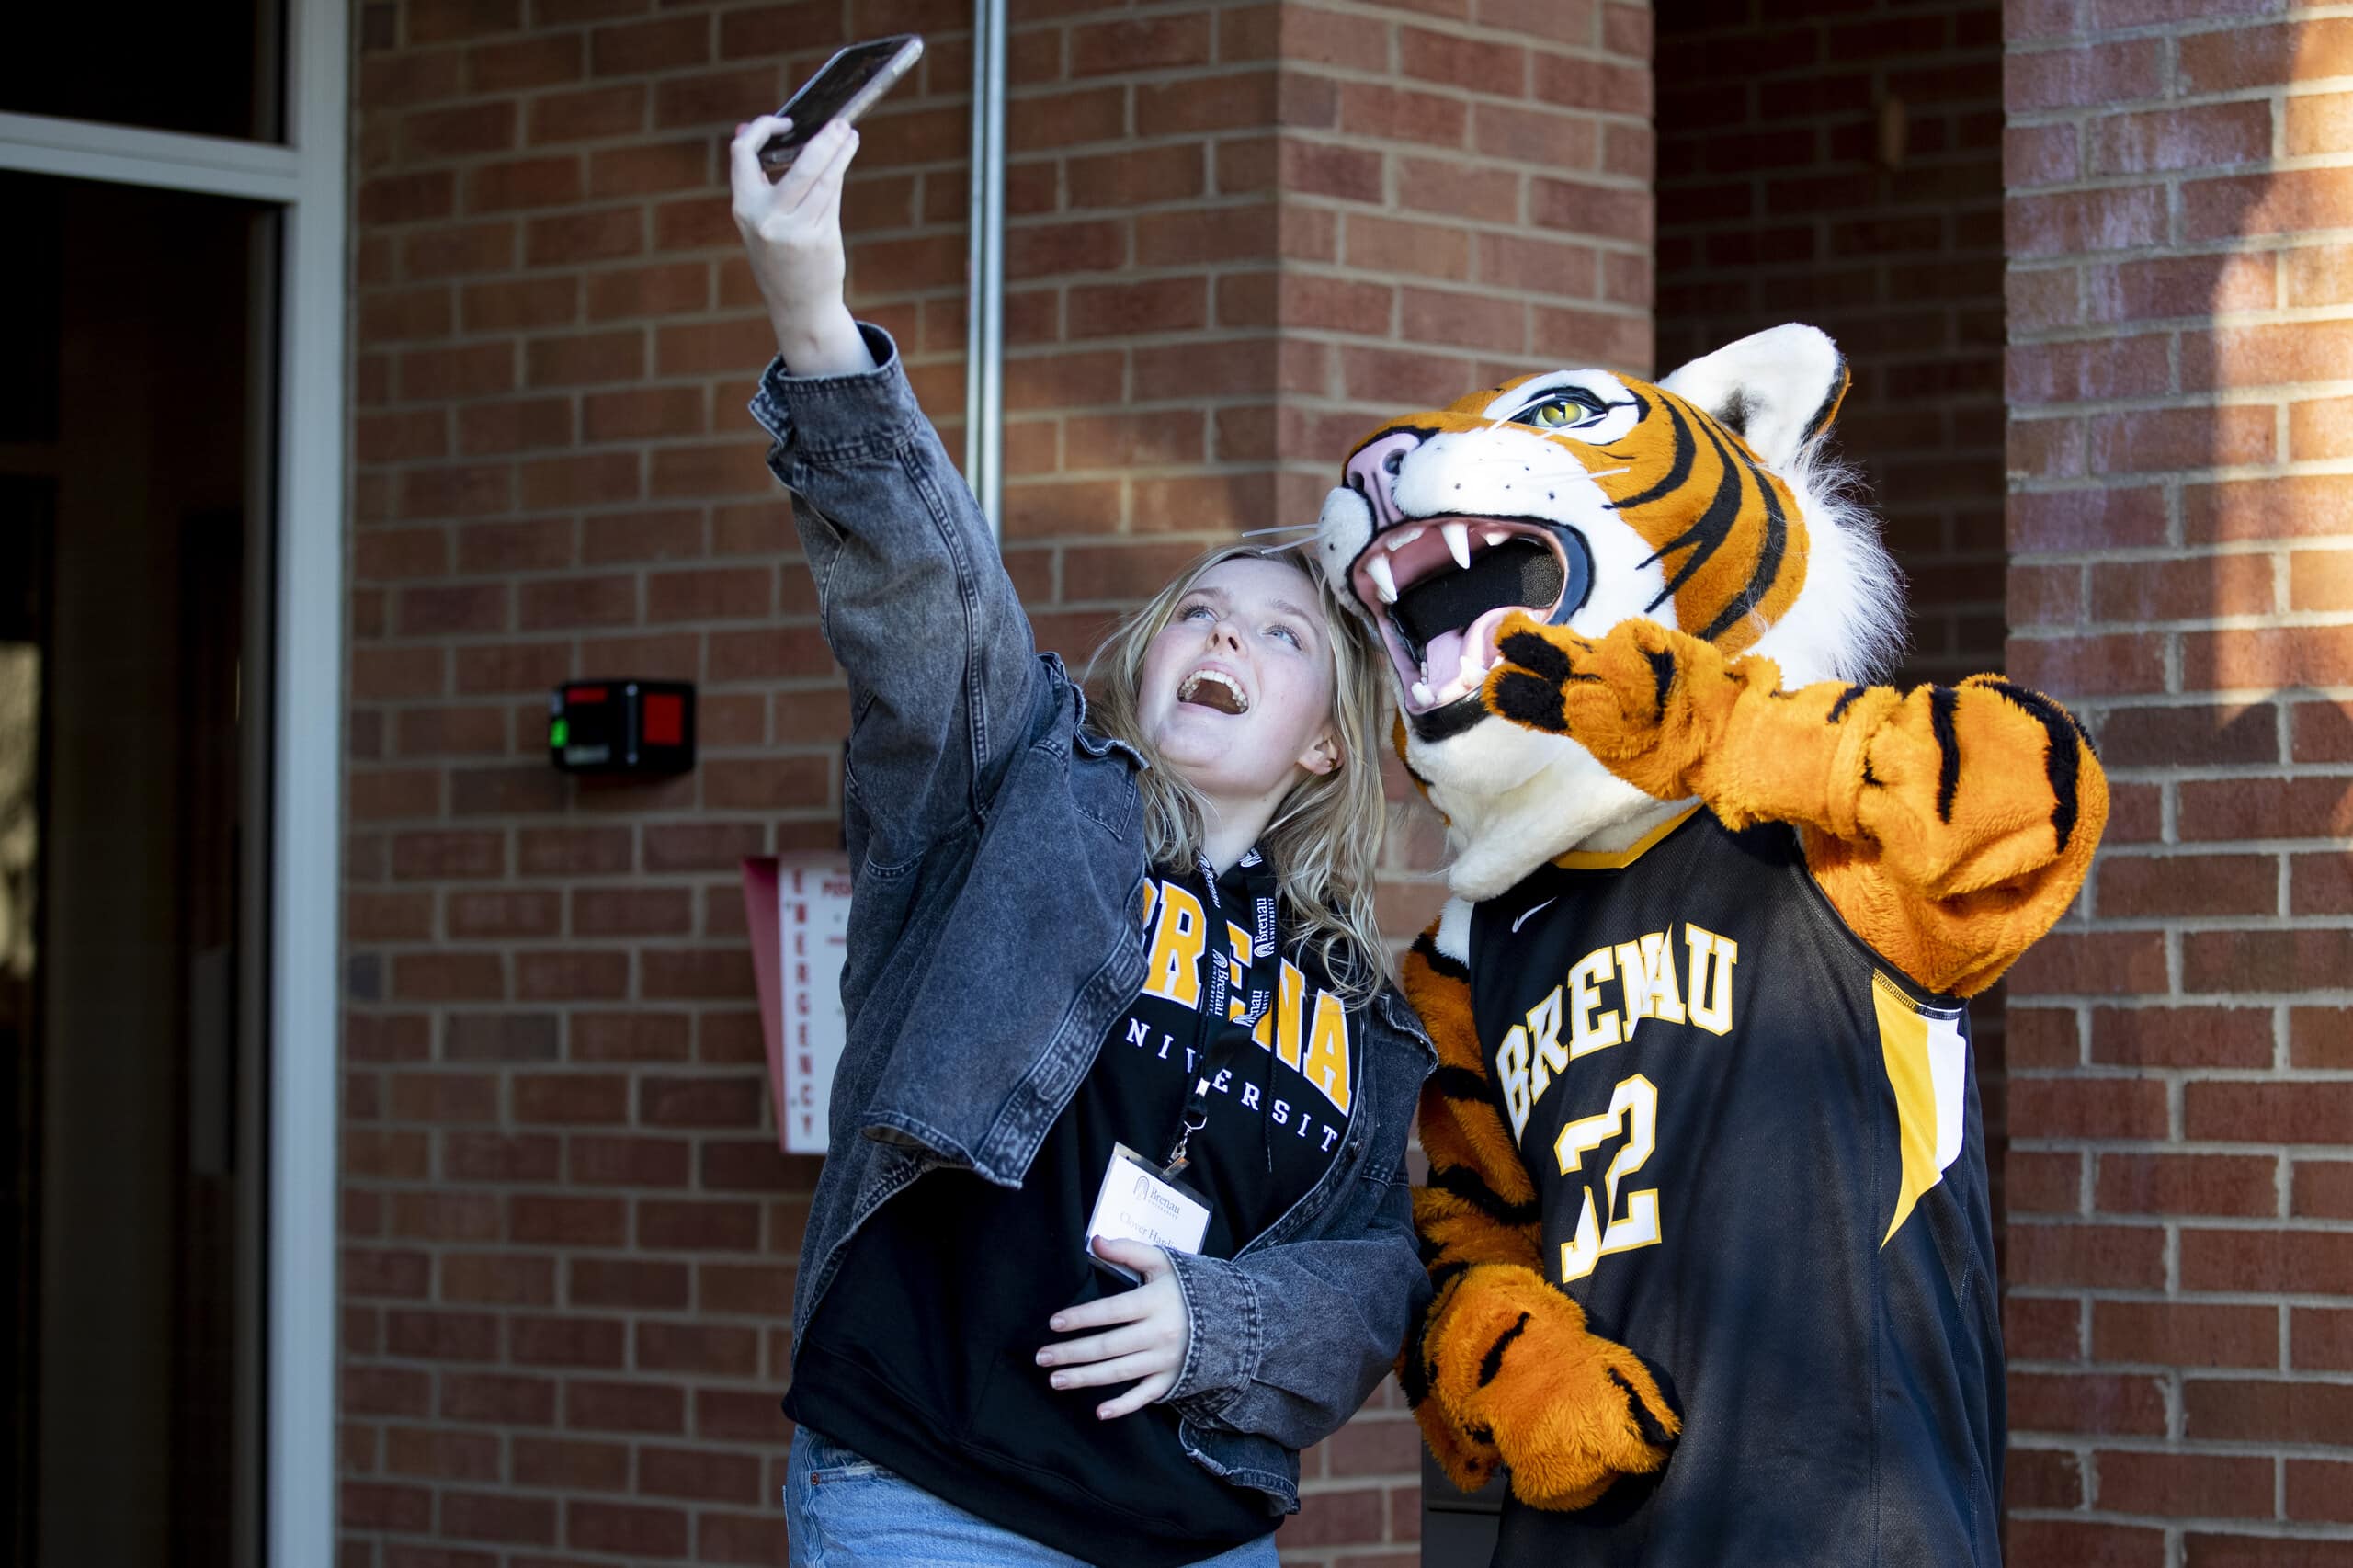 student takes a selfie with Brenau mascot